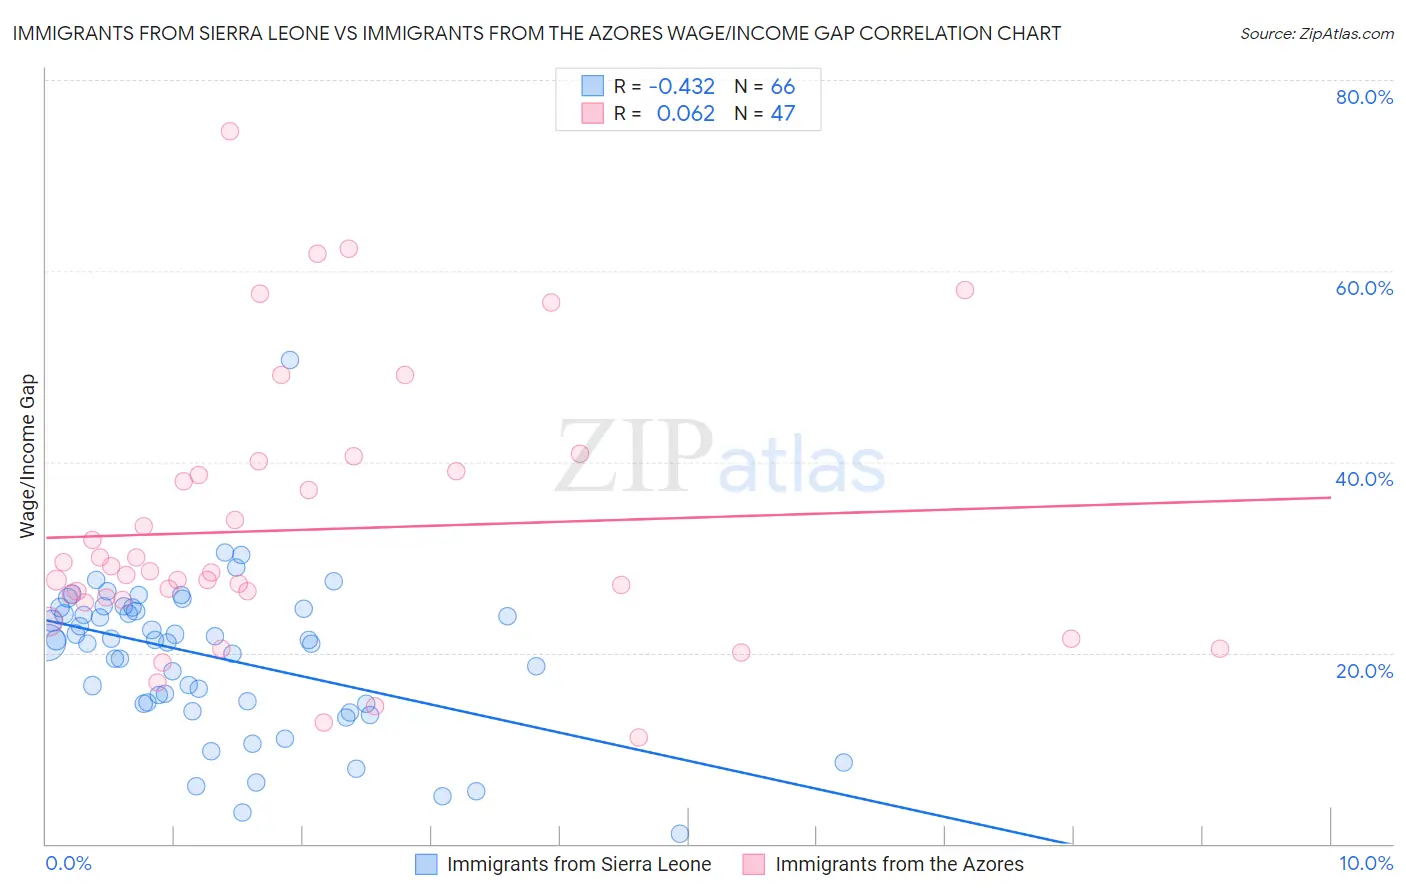 Immigrants from Sierra Leone vs Immigrants from the Azores Wage/Income Gap